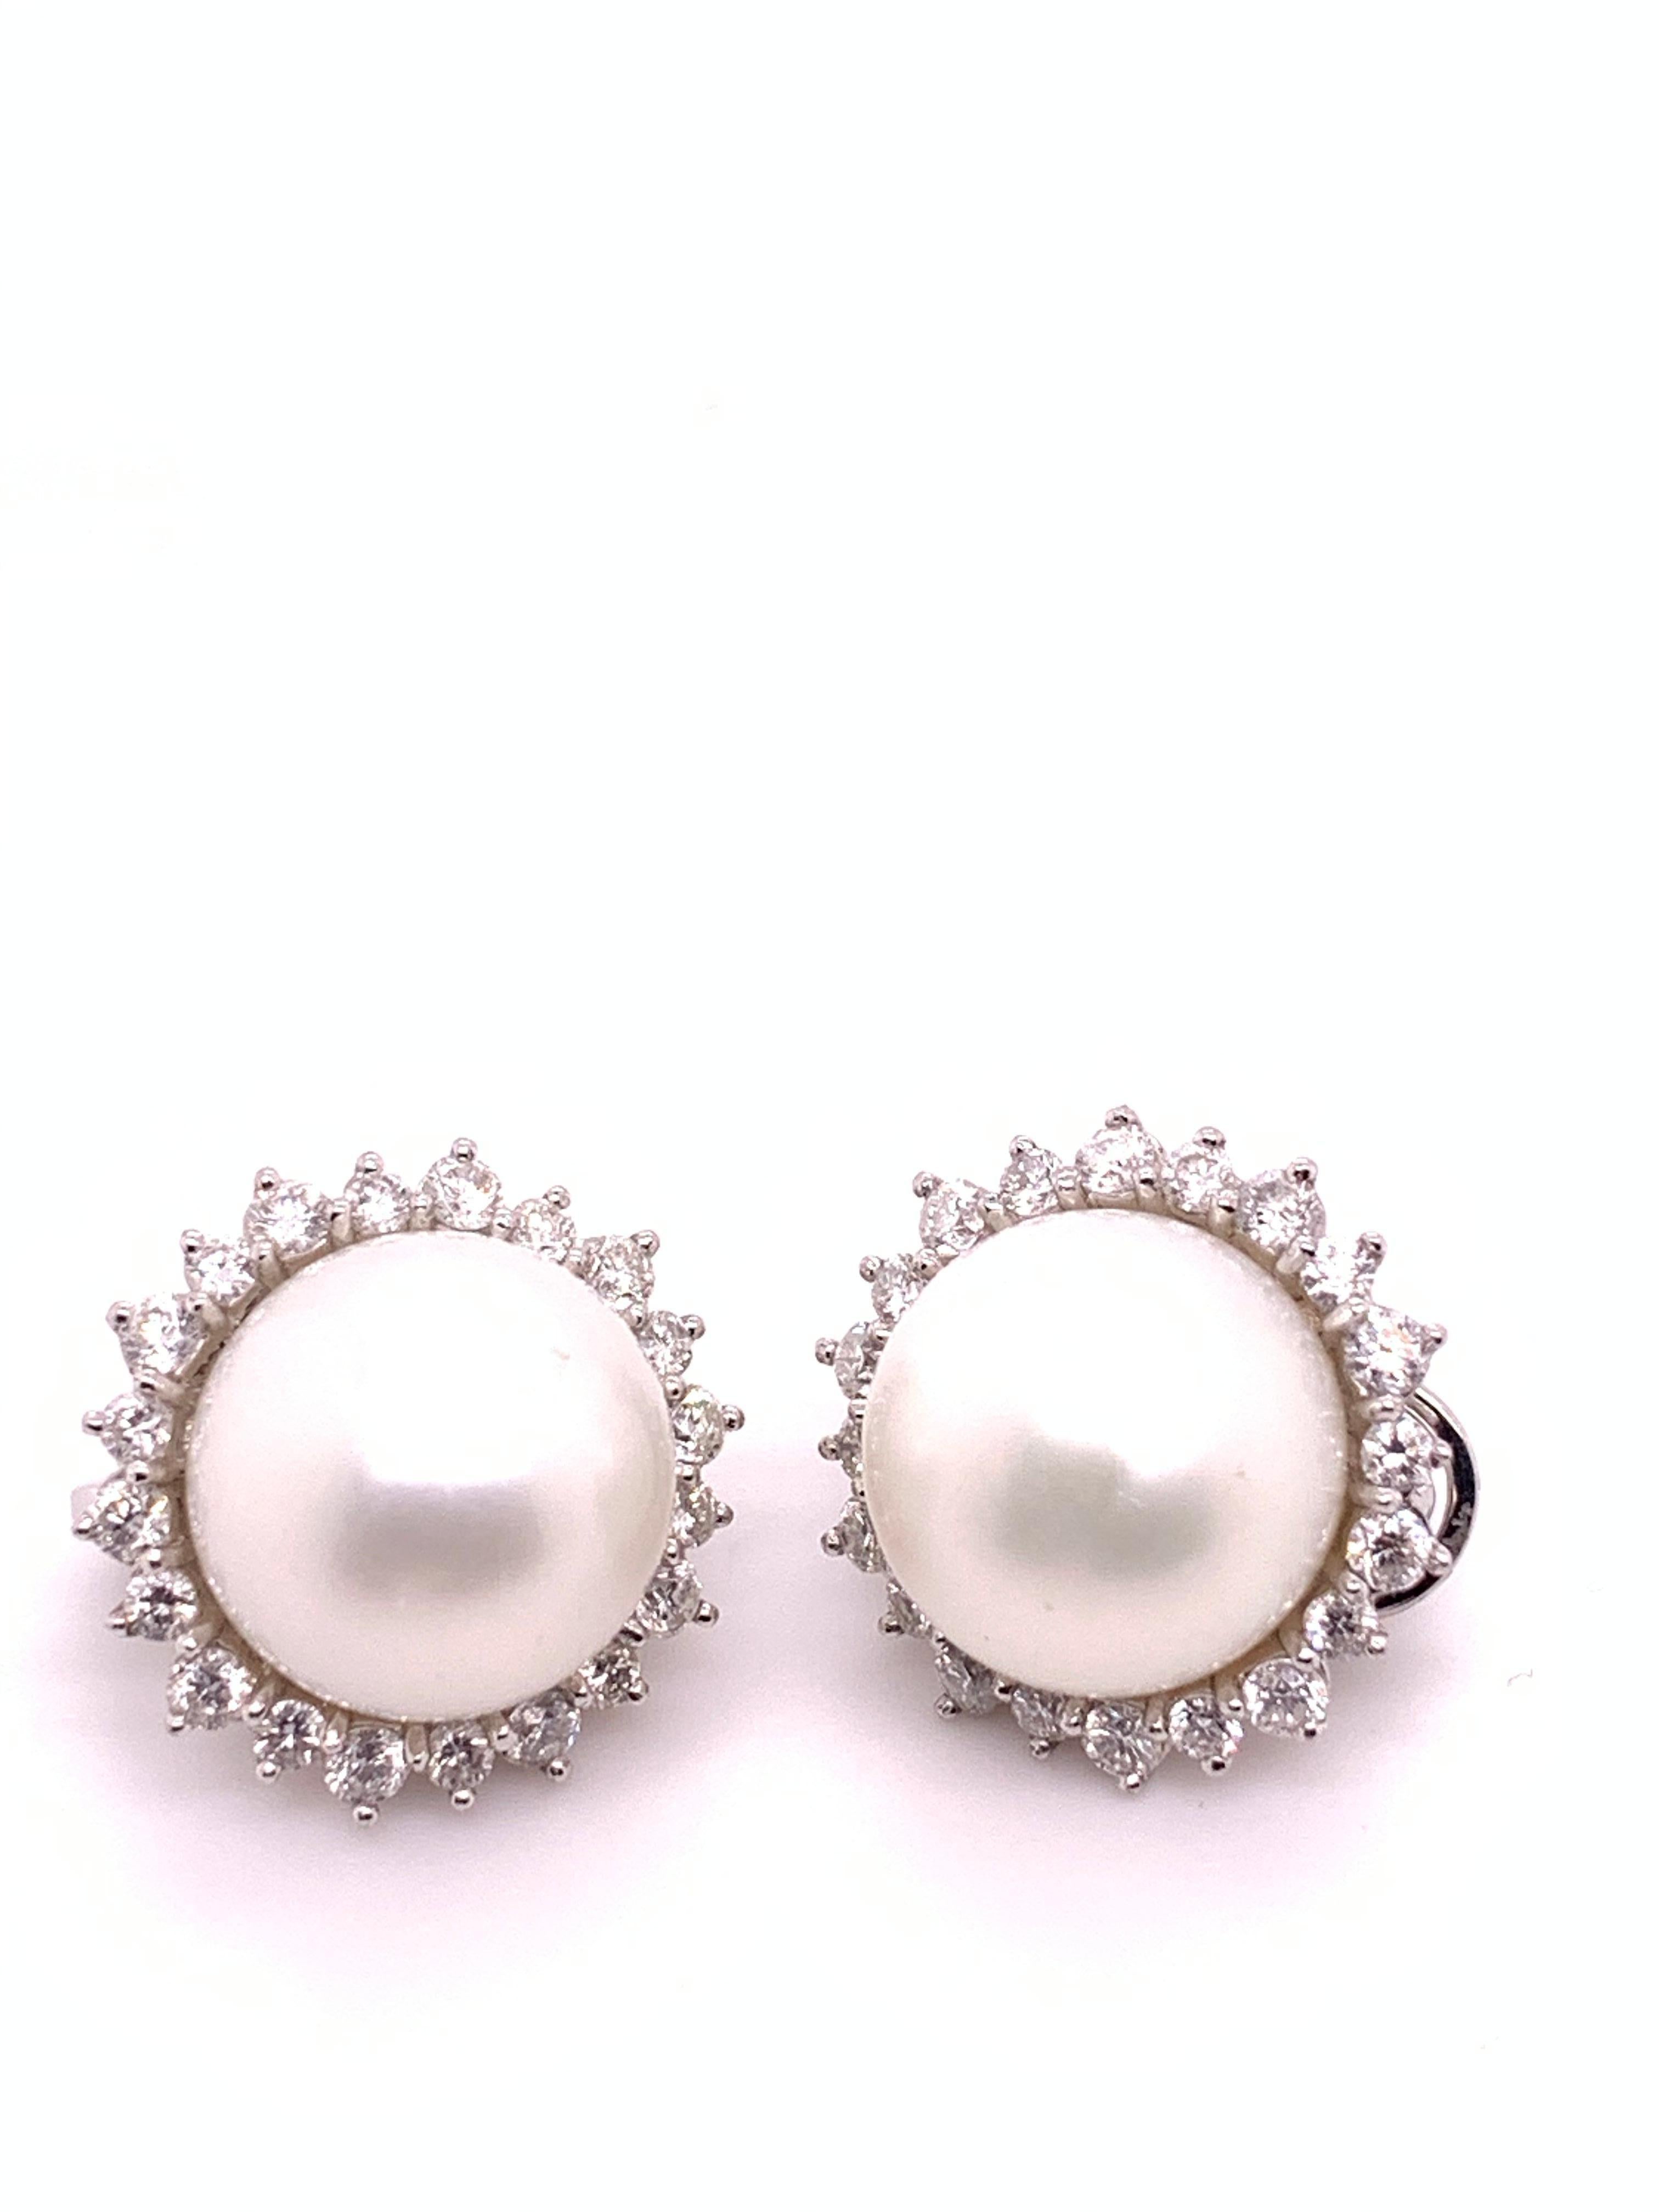 Sophia D, 2.61 Carat Diamond and Pearl Platinum Earrings In New Condition For Sale In New York, NY